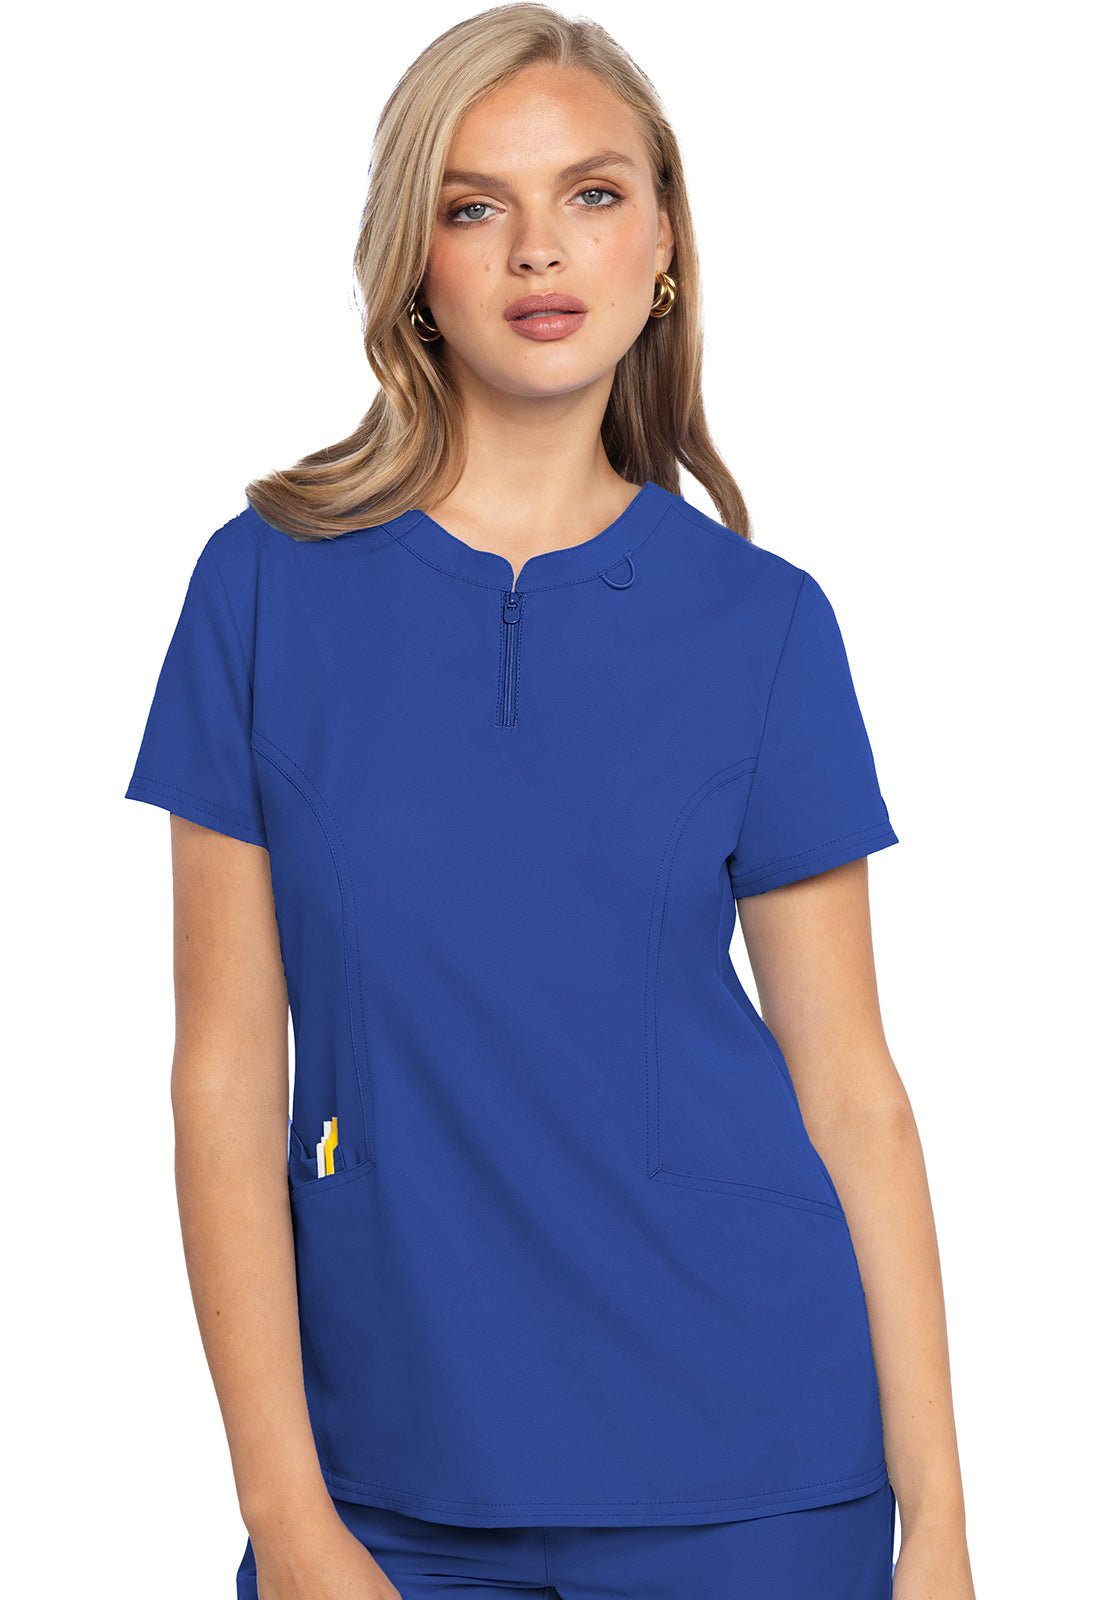 Med Couture Insight Zip Front Henley Scrub Top MC609 - Scrubs Select